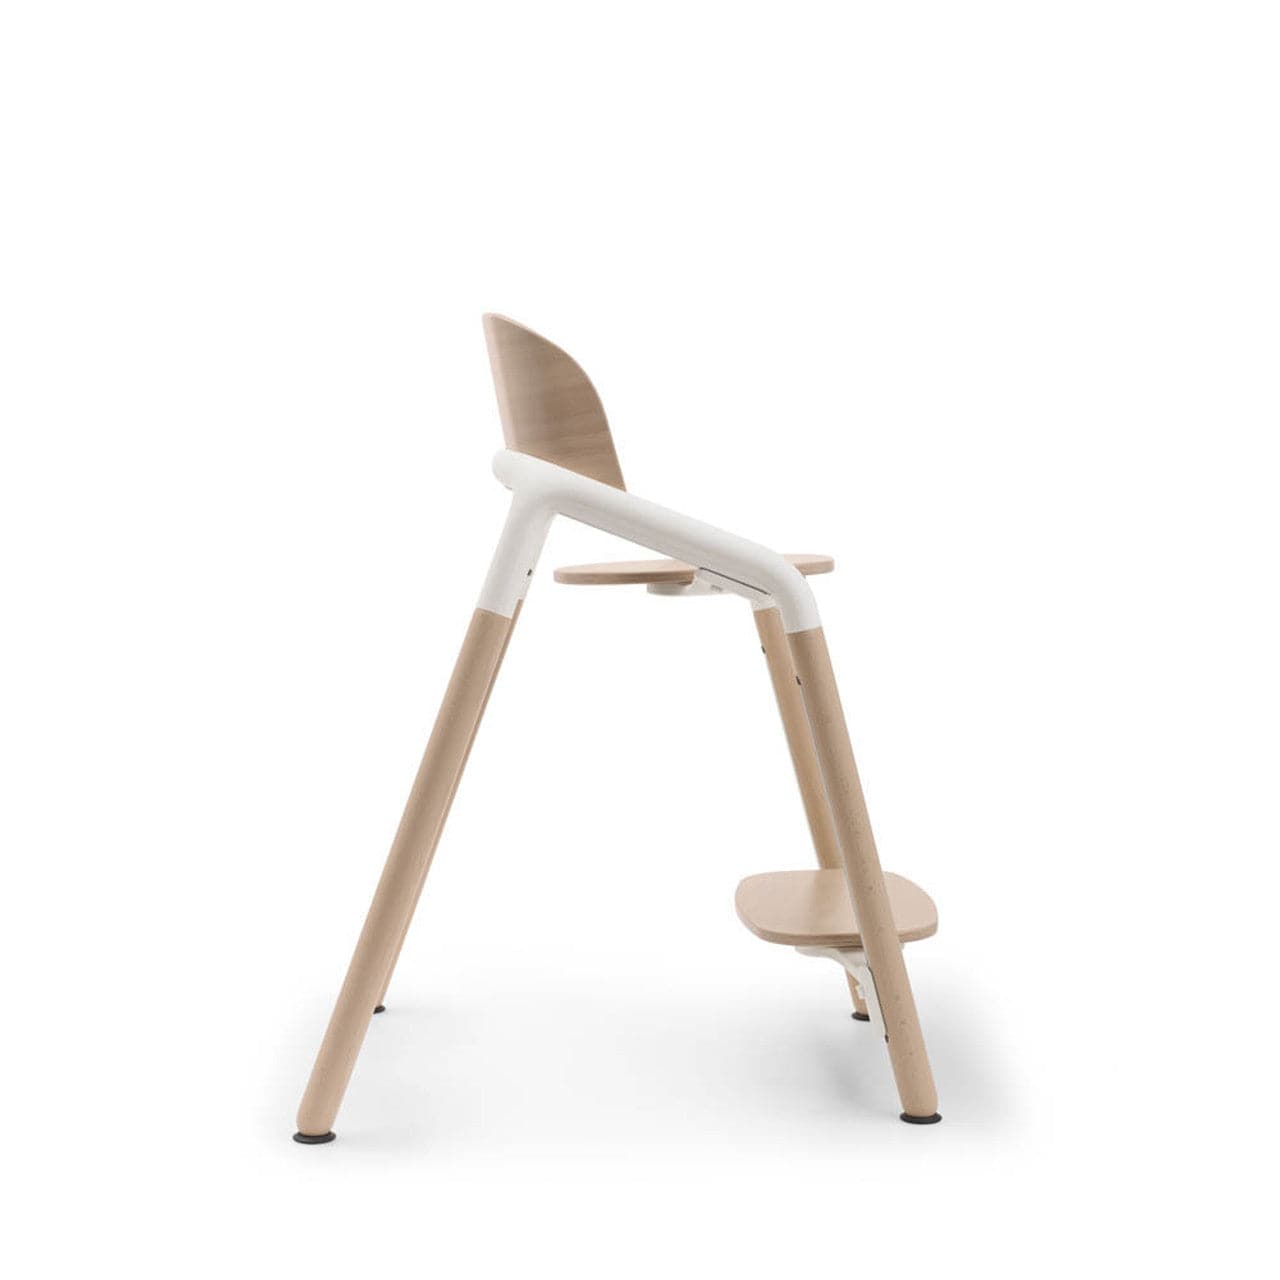 Bugaboo Giraffe Highchair Ultimate Bundle - Neutral Wood/White -  | For Your Little One